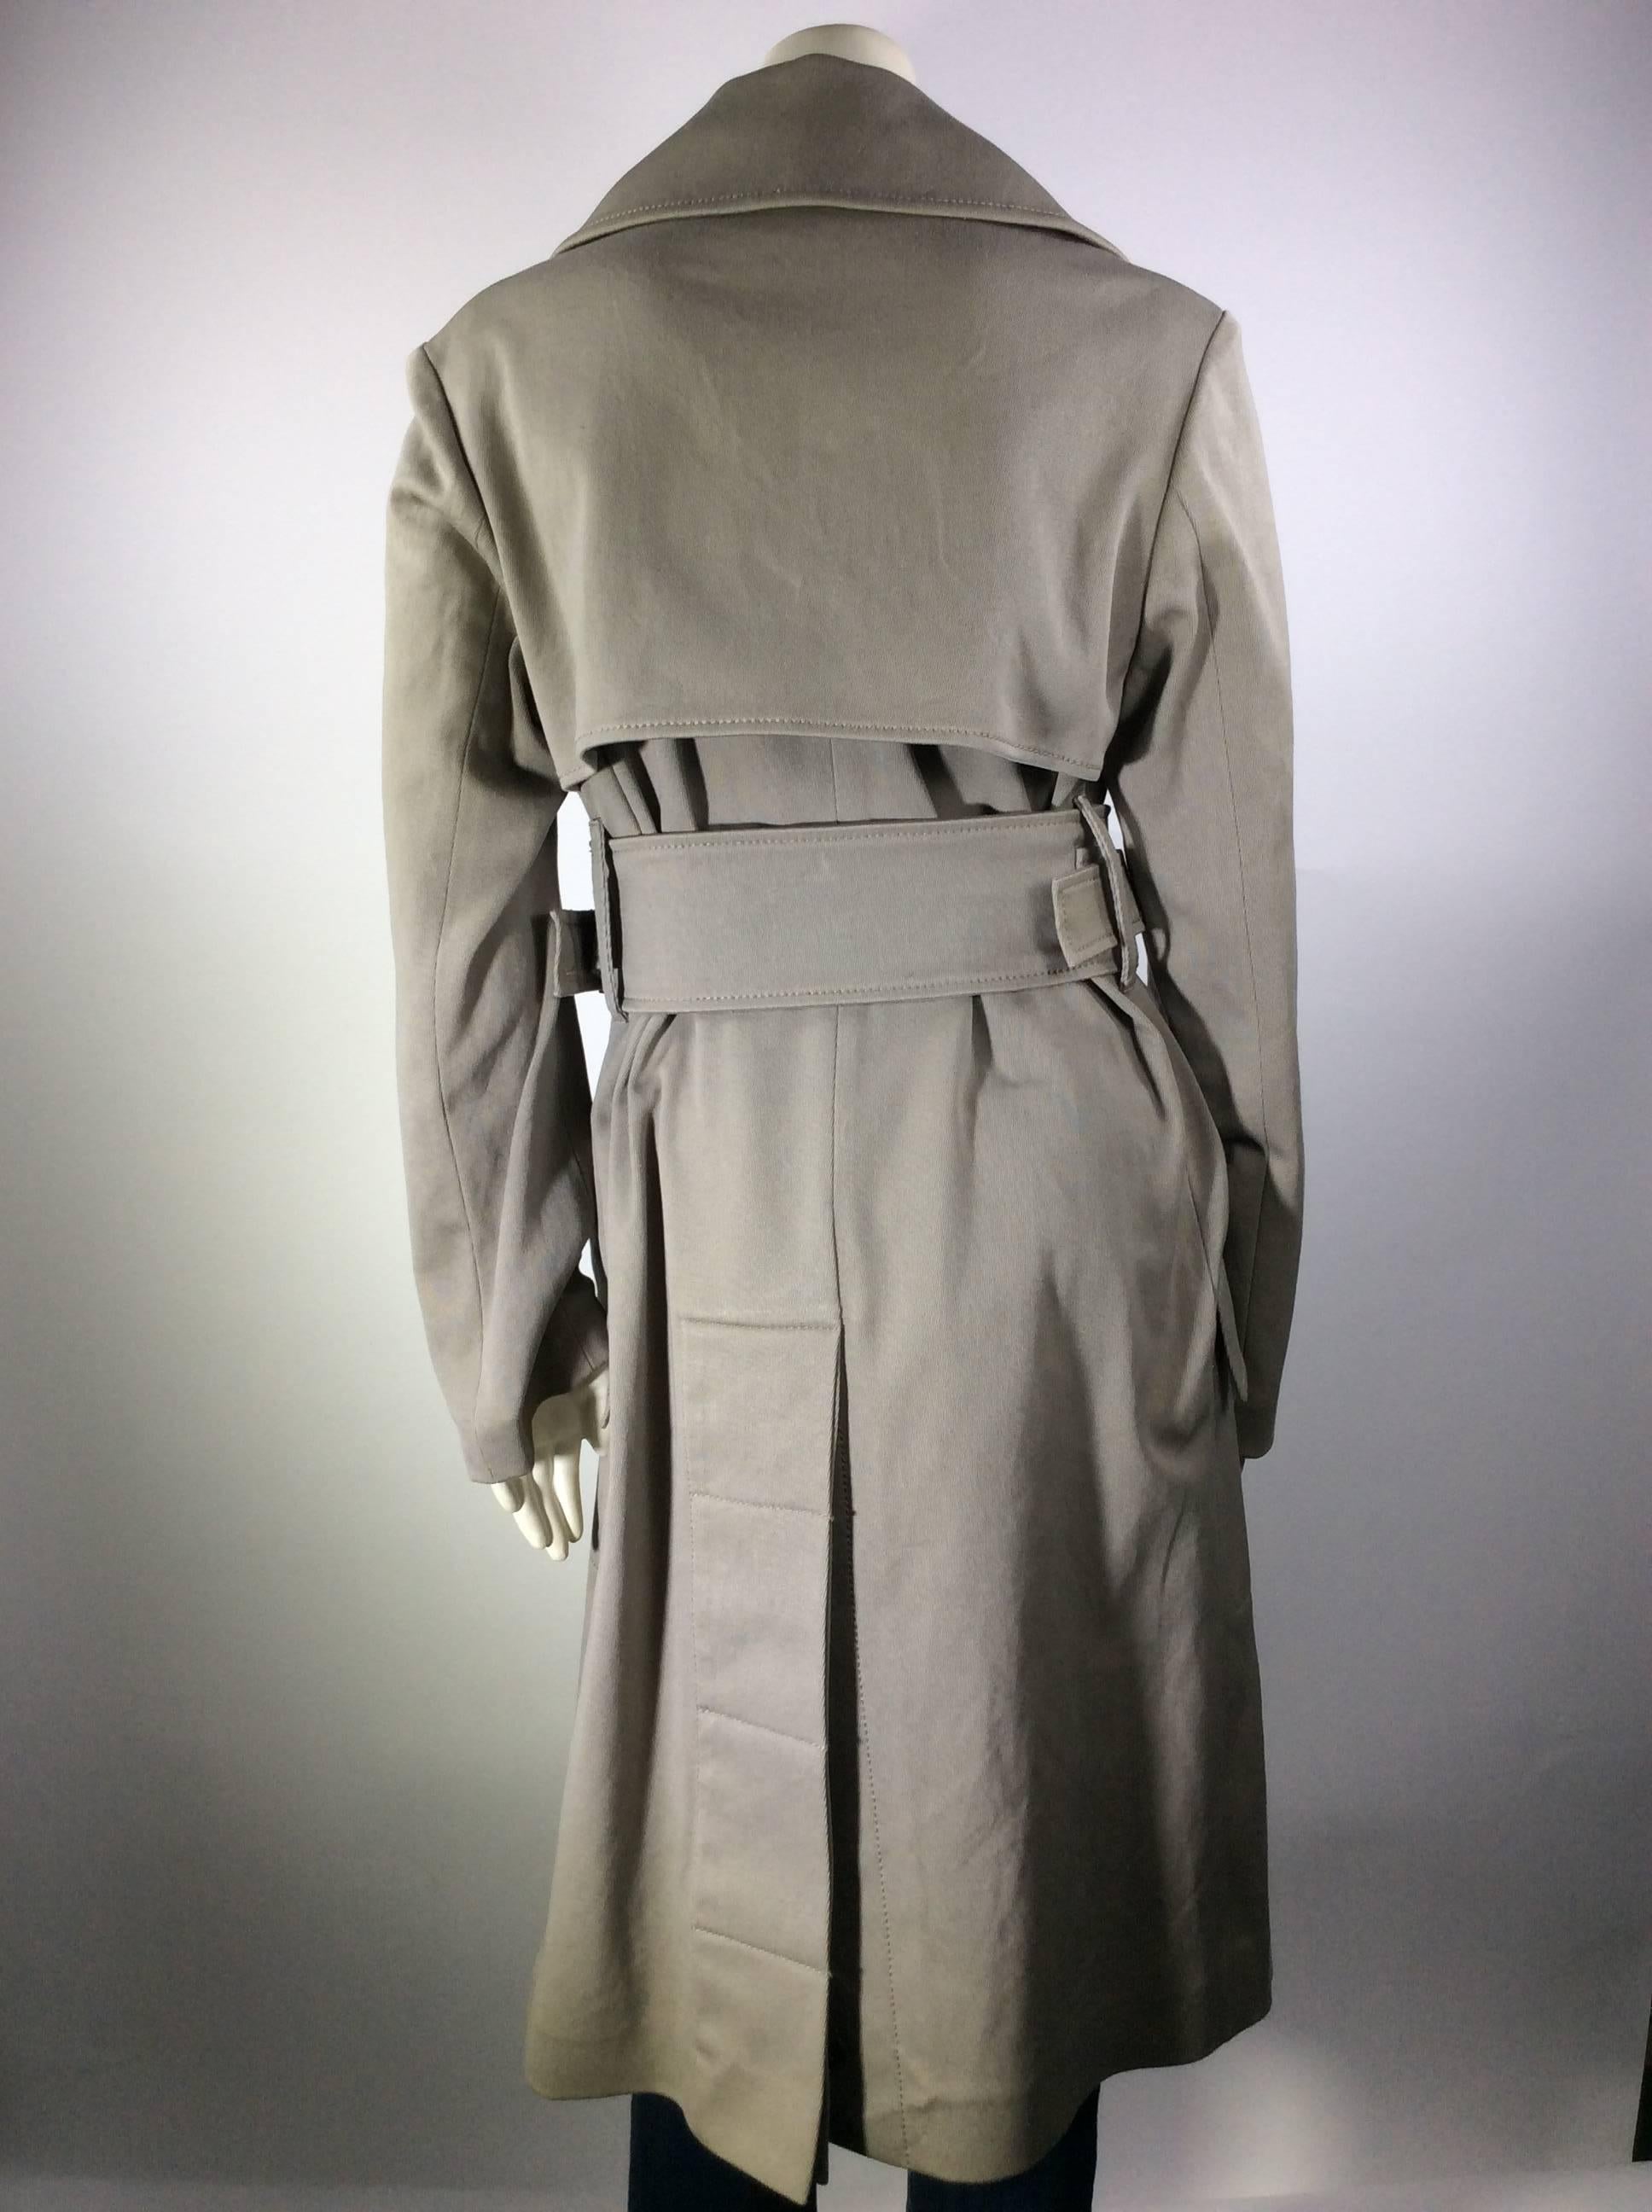 Gucci Grey Belted Trench Coat In Excellent Condition For Sale In Narberth, PA